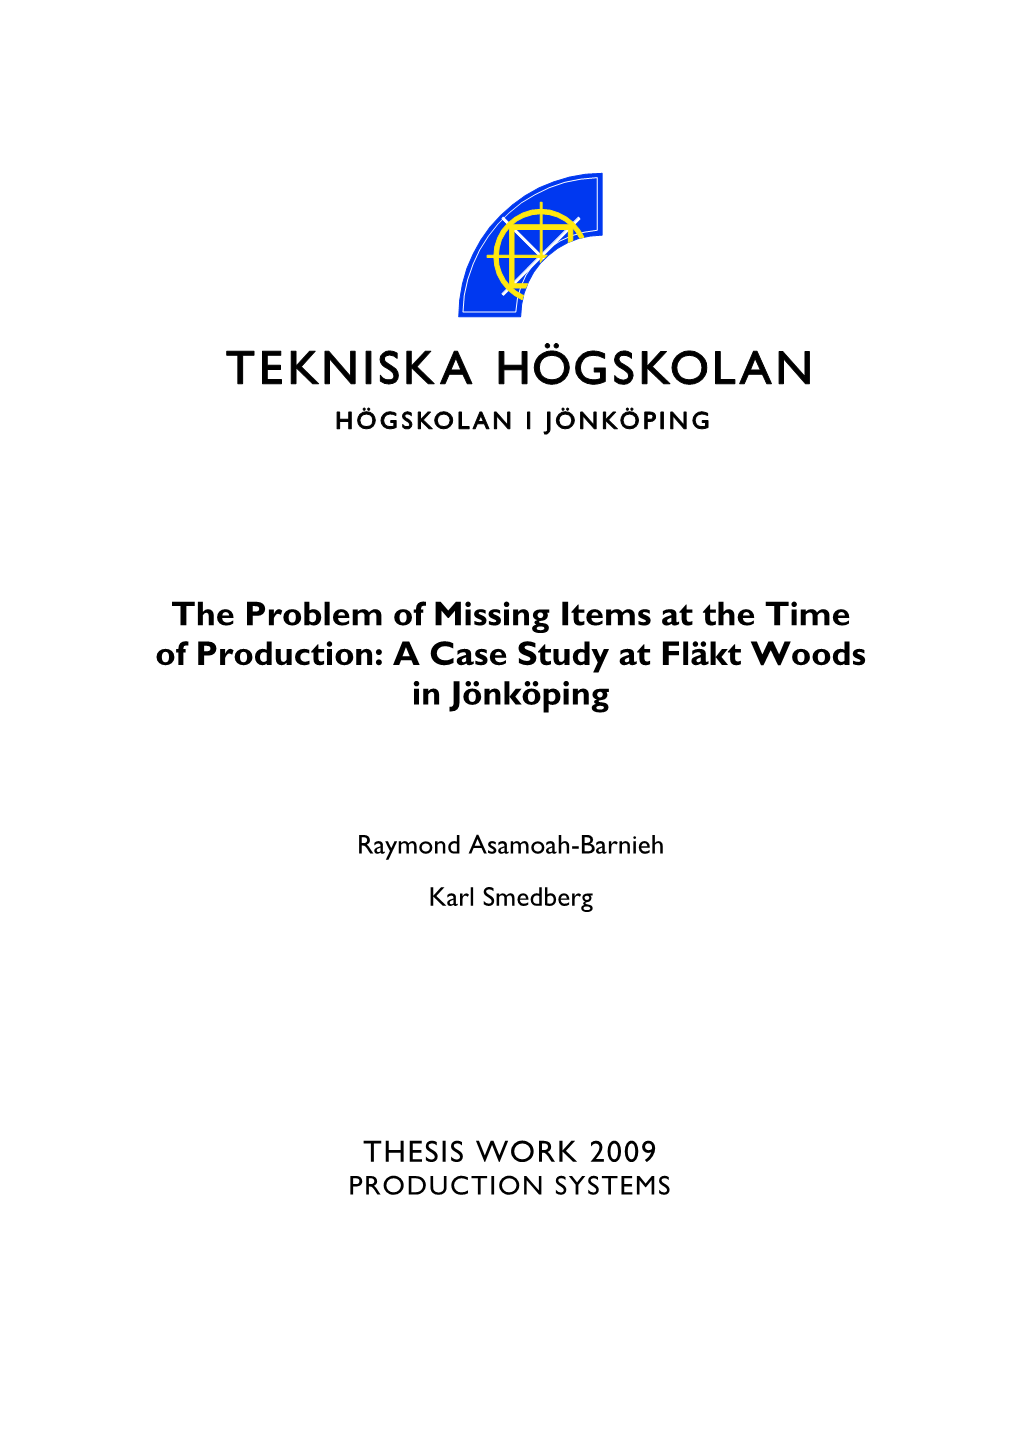 The Problem of Missing Items at the Time of Production: a Case Study at Fläkt Woods in Jönköping